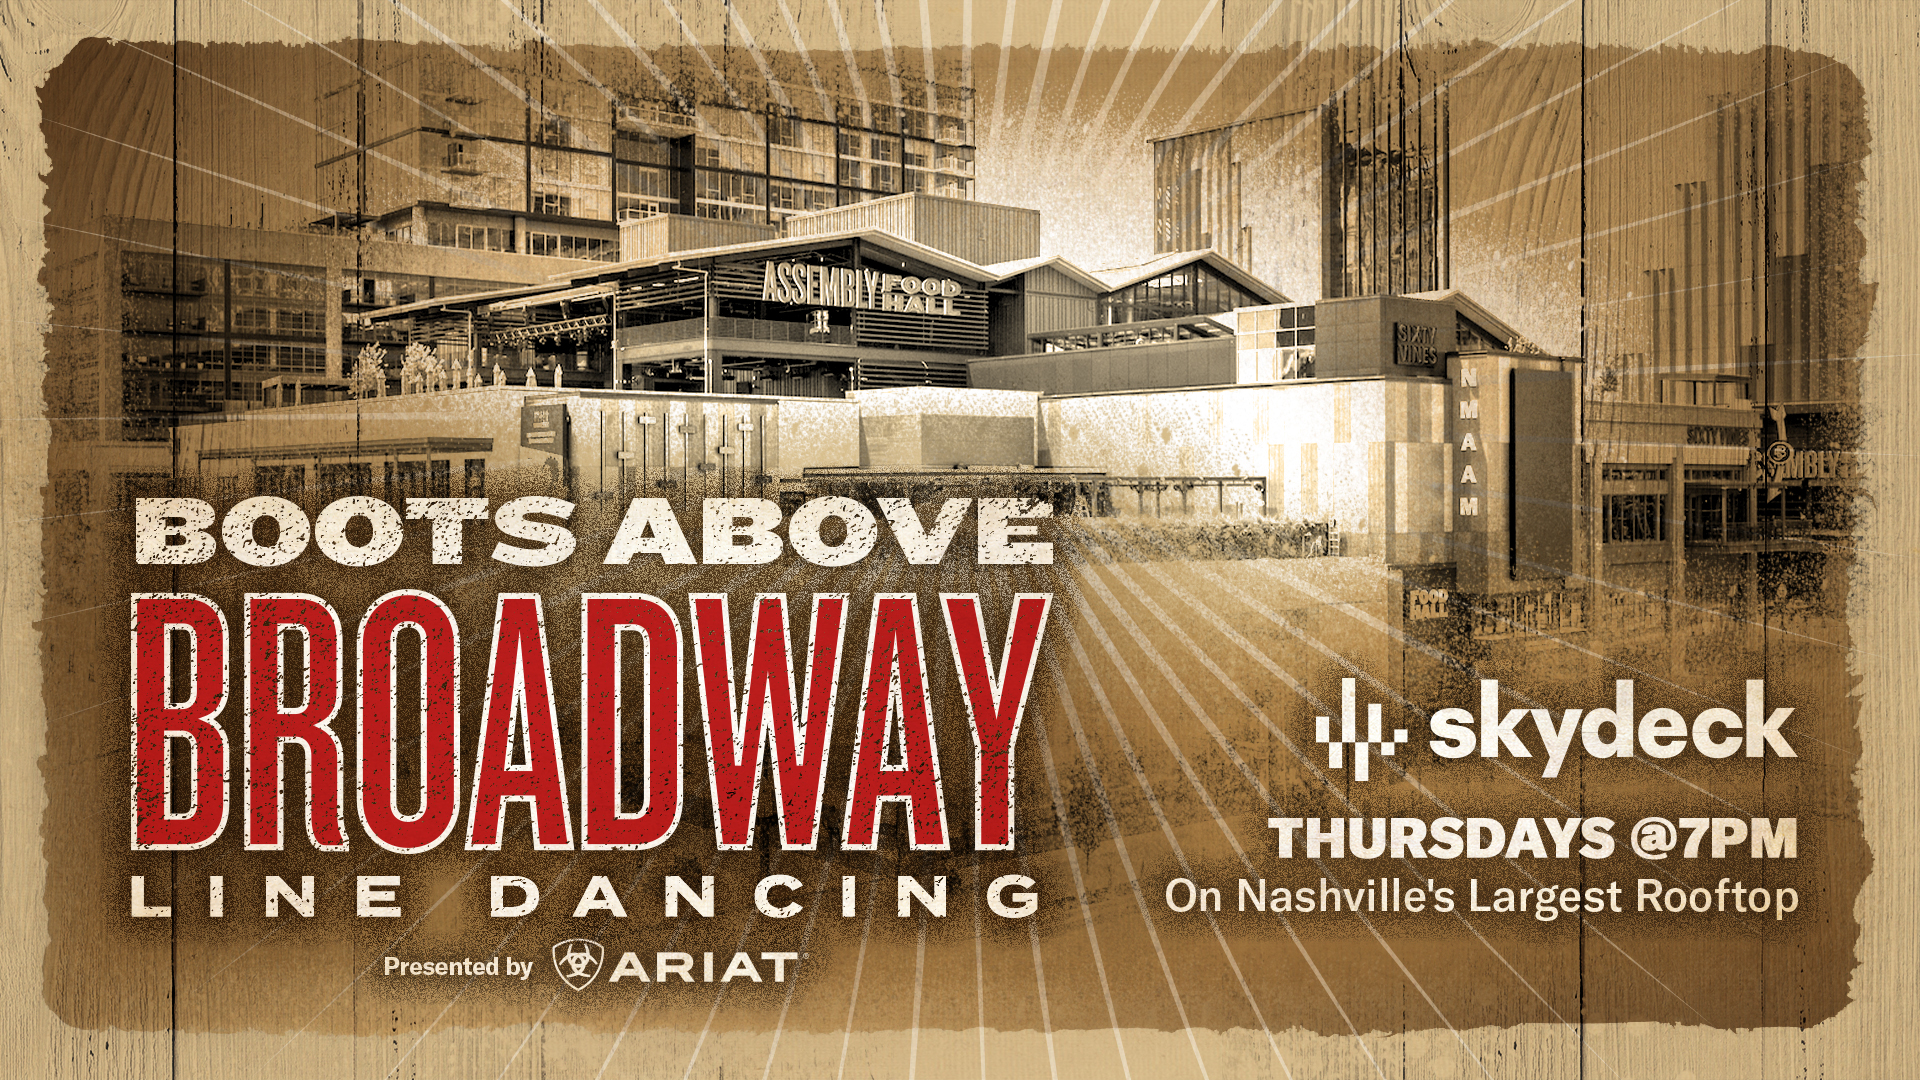 Promo image of Boots Above Broadway presented by Ariat